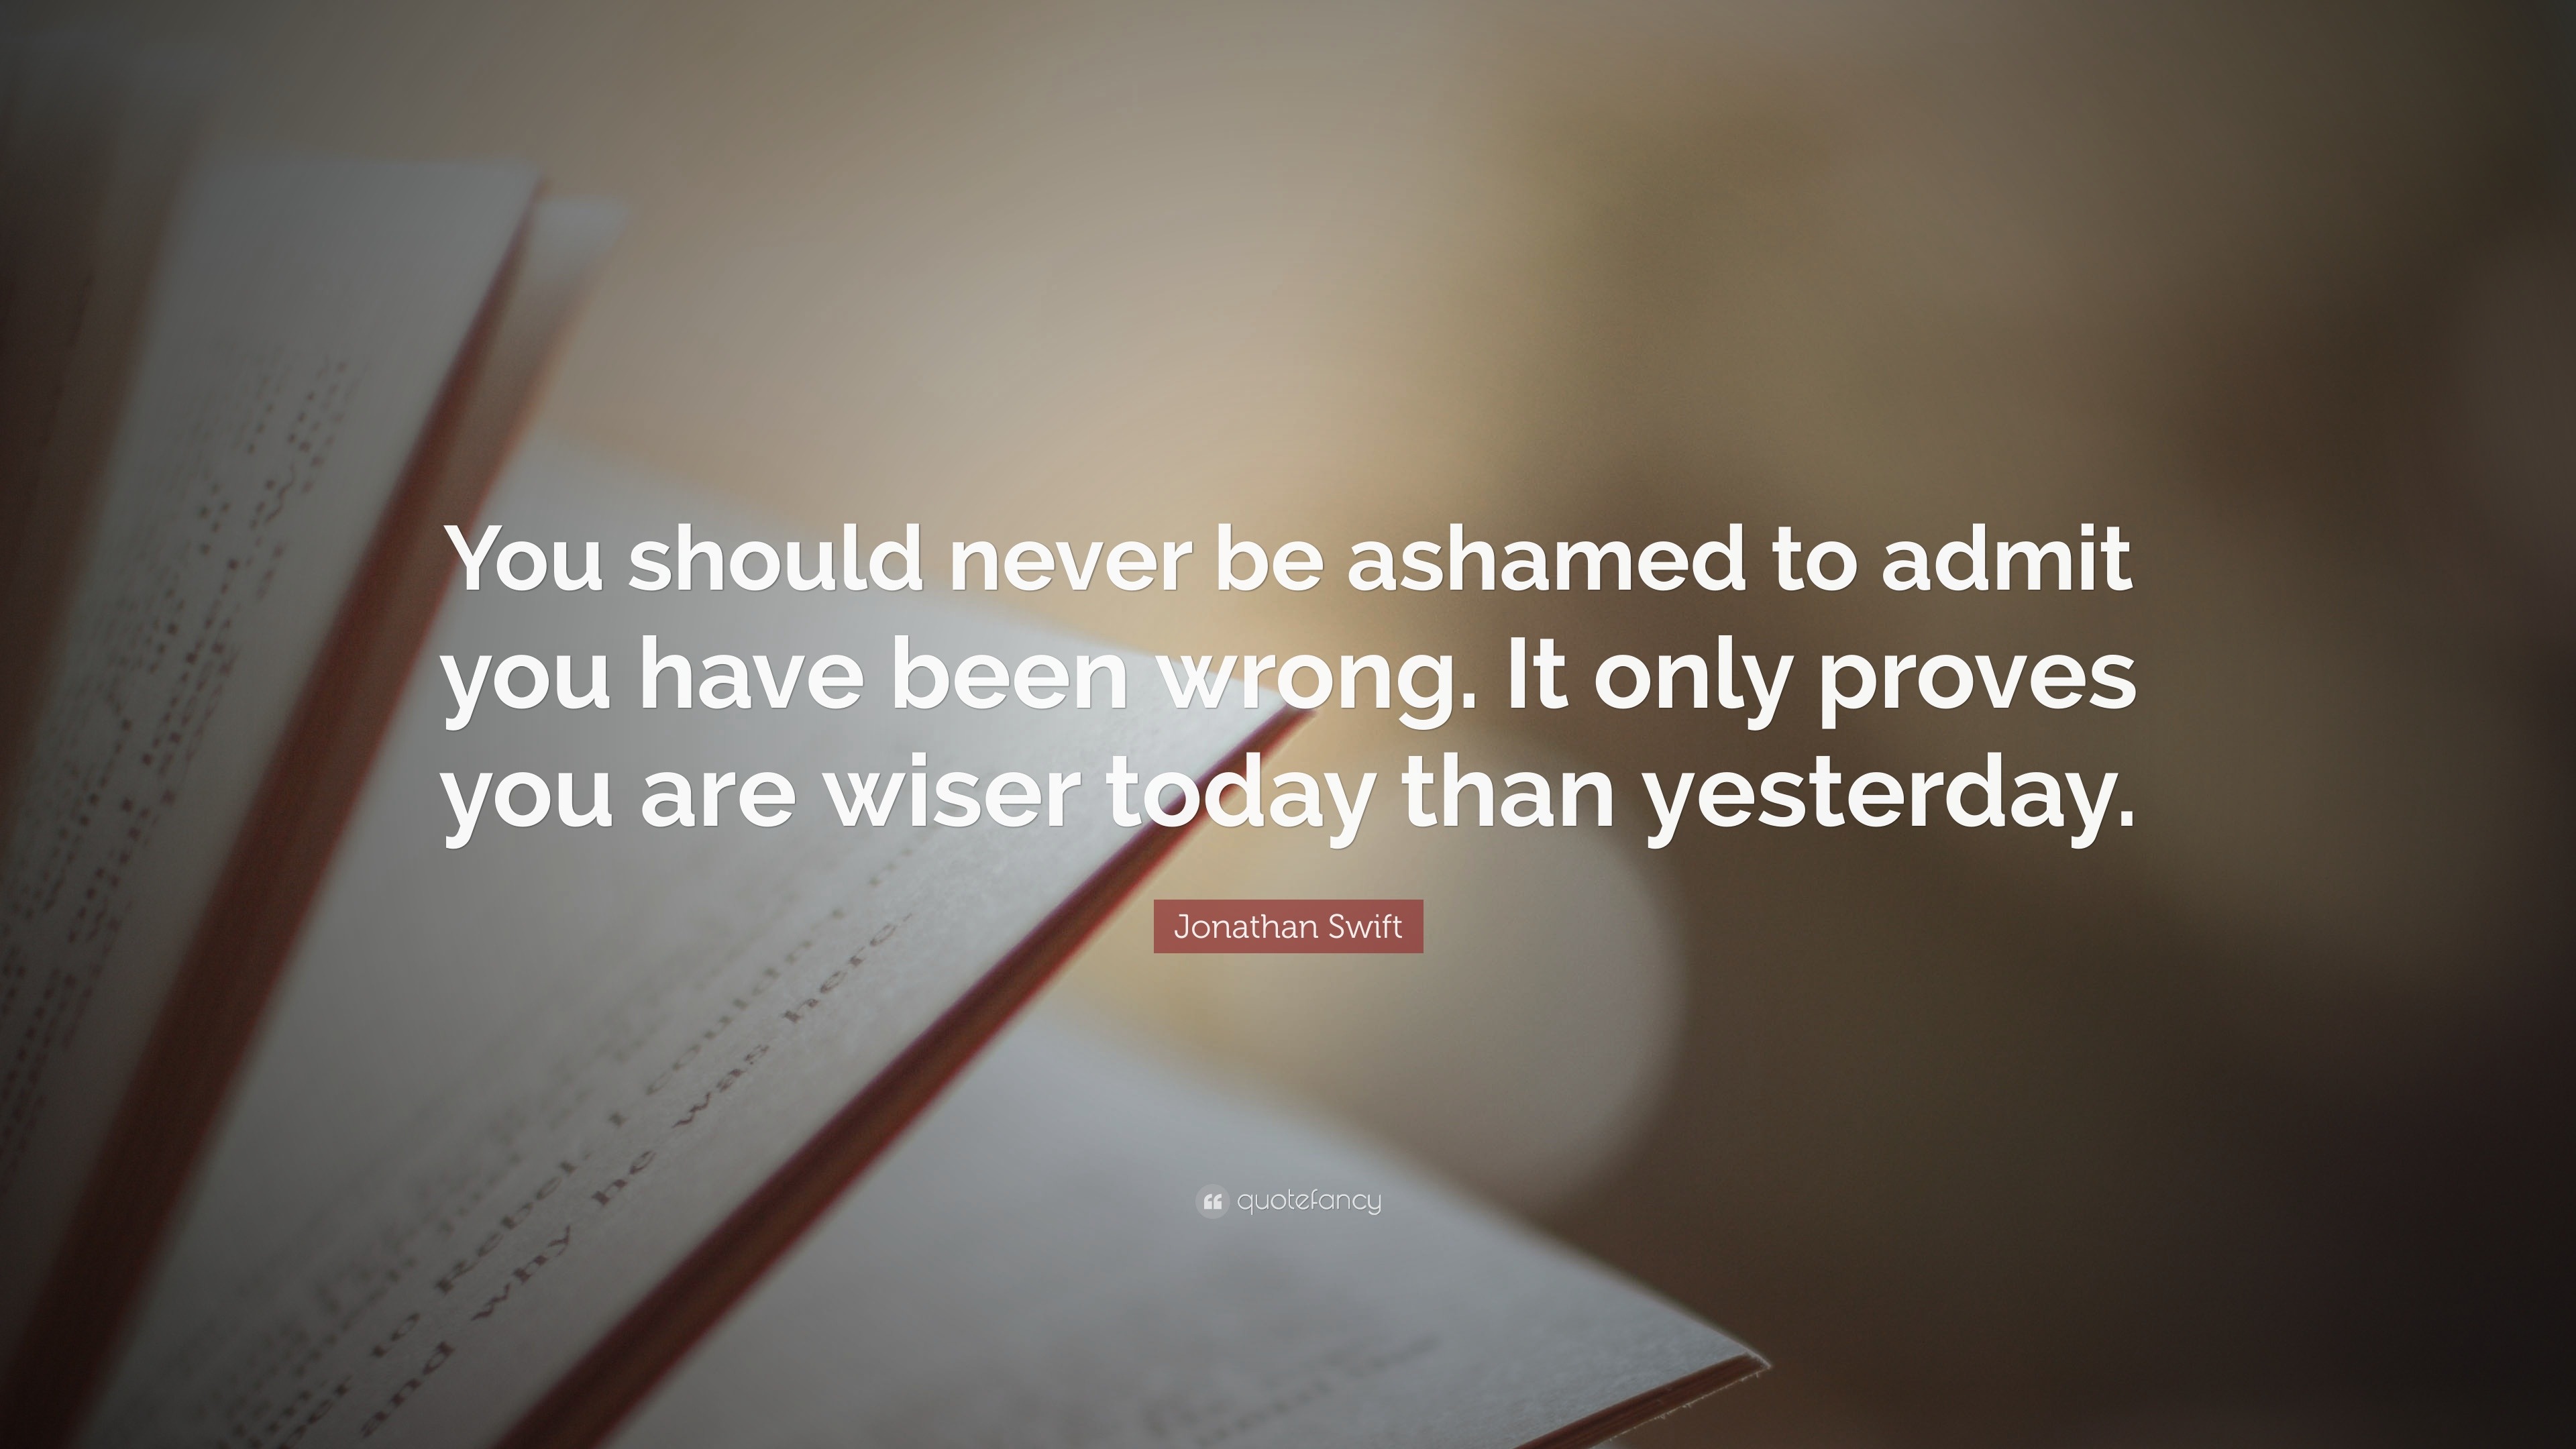 Jonathan Swift Quote: “You should never be ashamed to admit you have ...